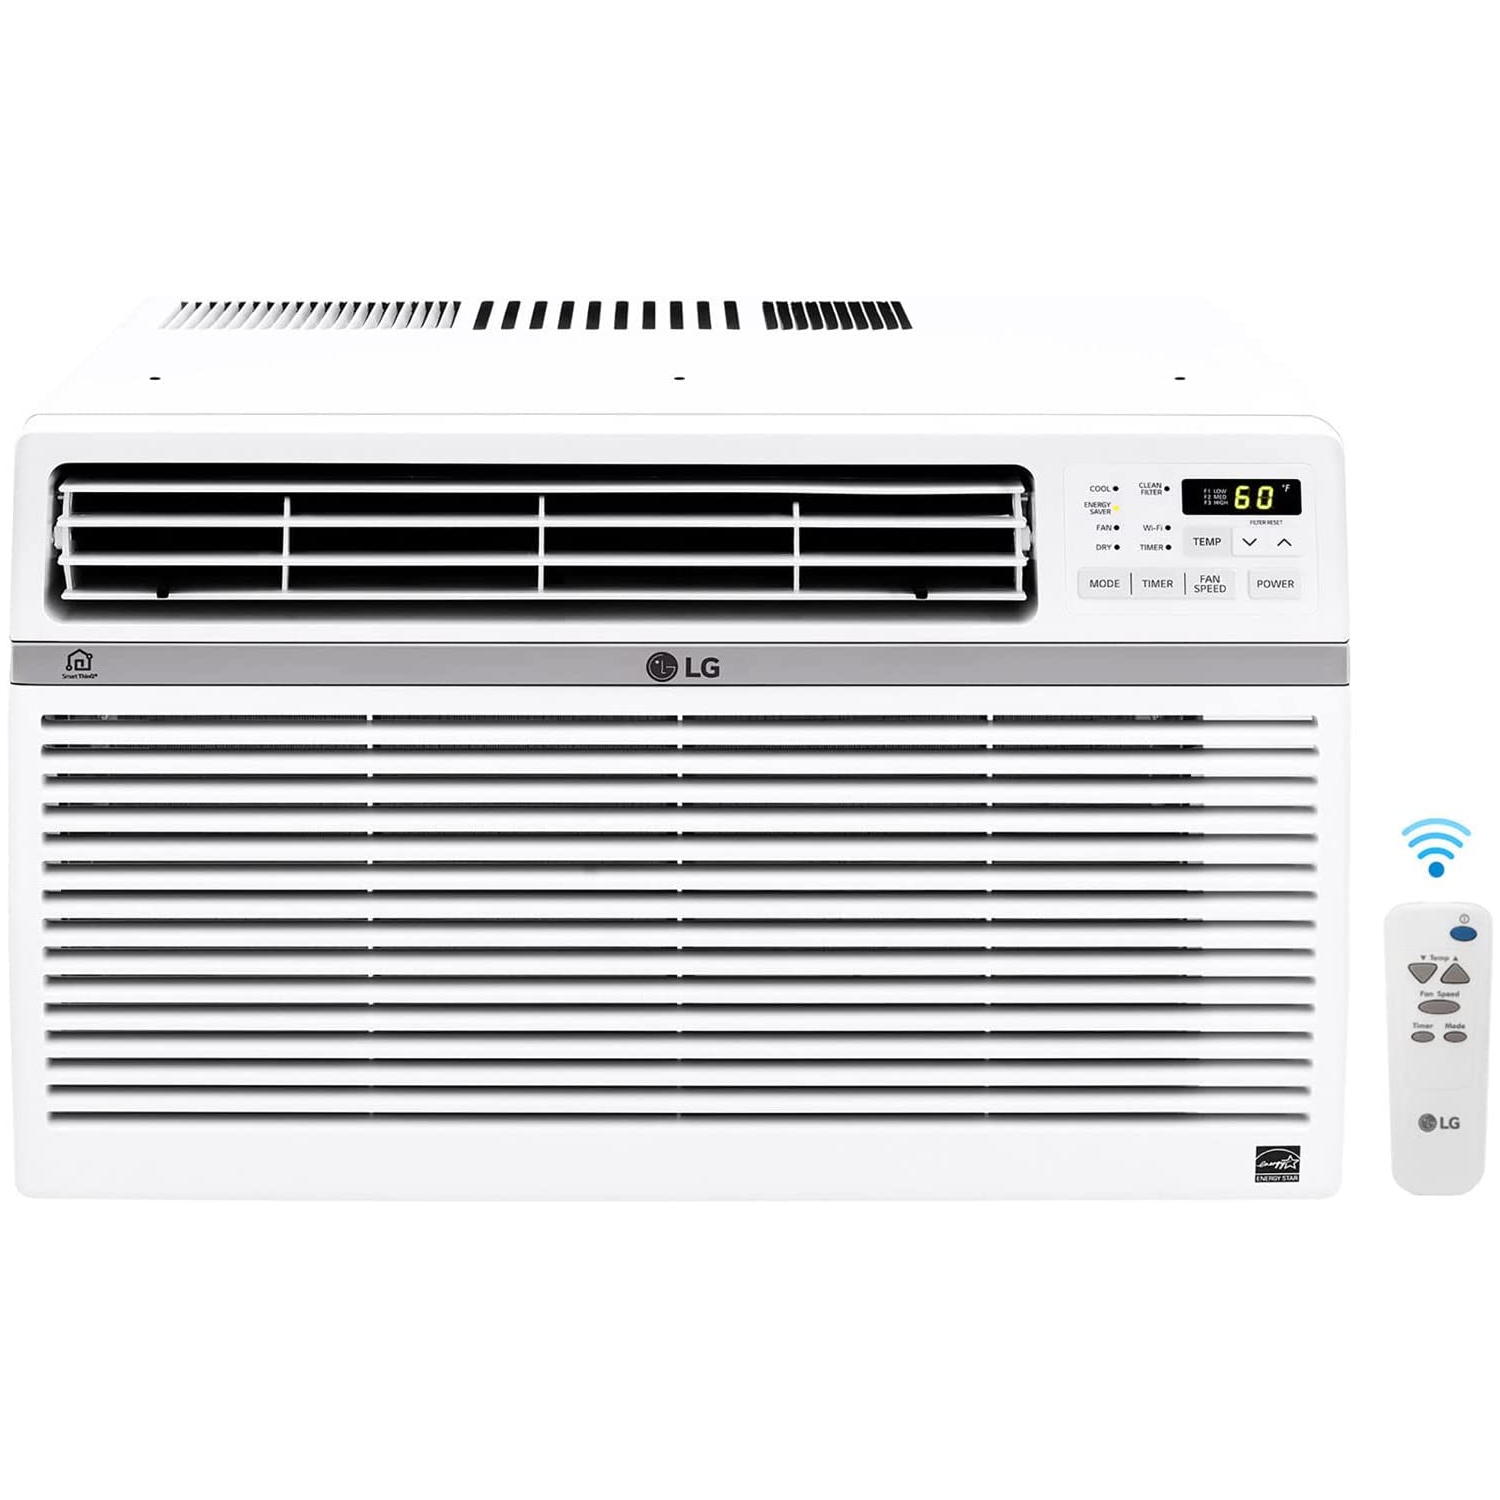 LG 10,000 BTU Smart Window Air Conditioner, Cools up to 450 Sq. Ft, Smartphone and Voice Control Works ThinQ, Amazon Alexa and Hey Google, 3 Cool & Fan Speeds, 115V (LW1017ERSM)